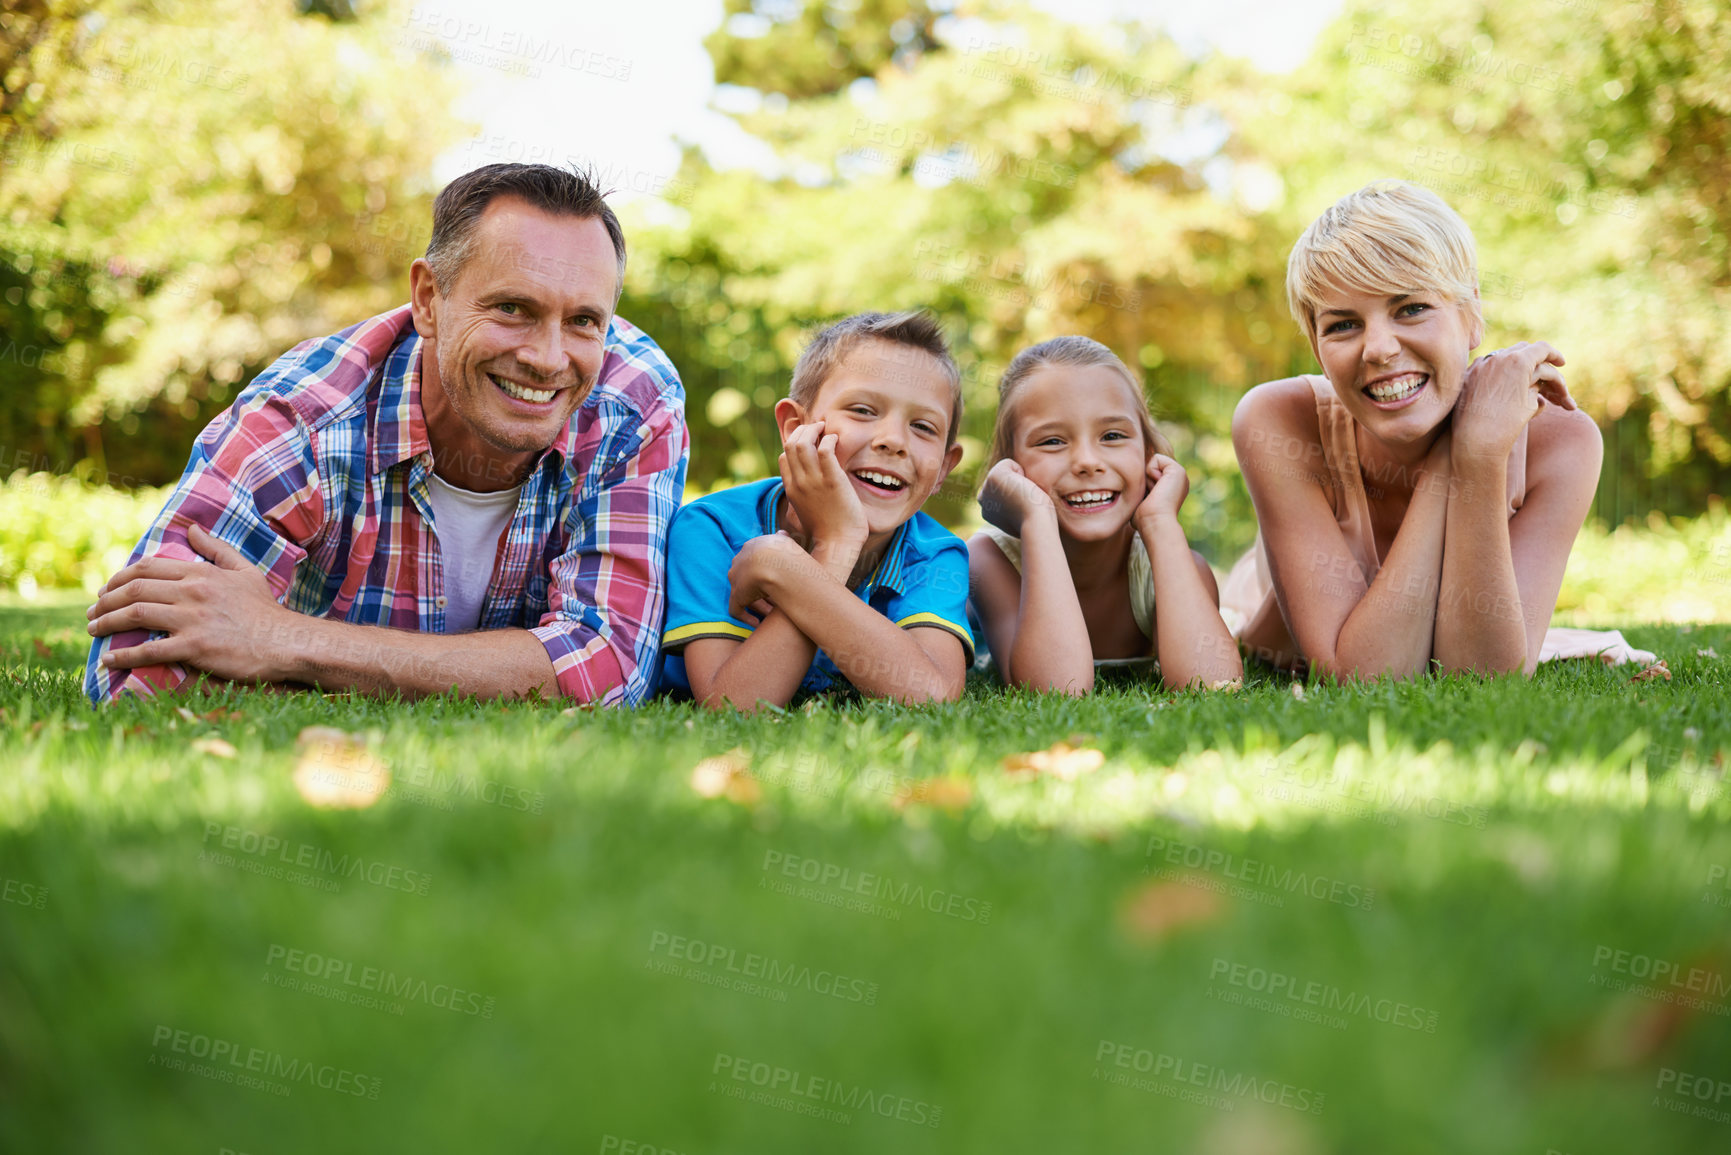 Buy stock photo A front view portrait of a happy family lying on the grass outdoors